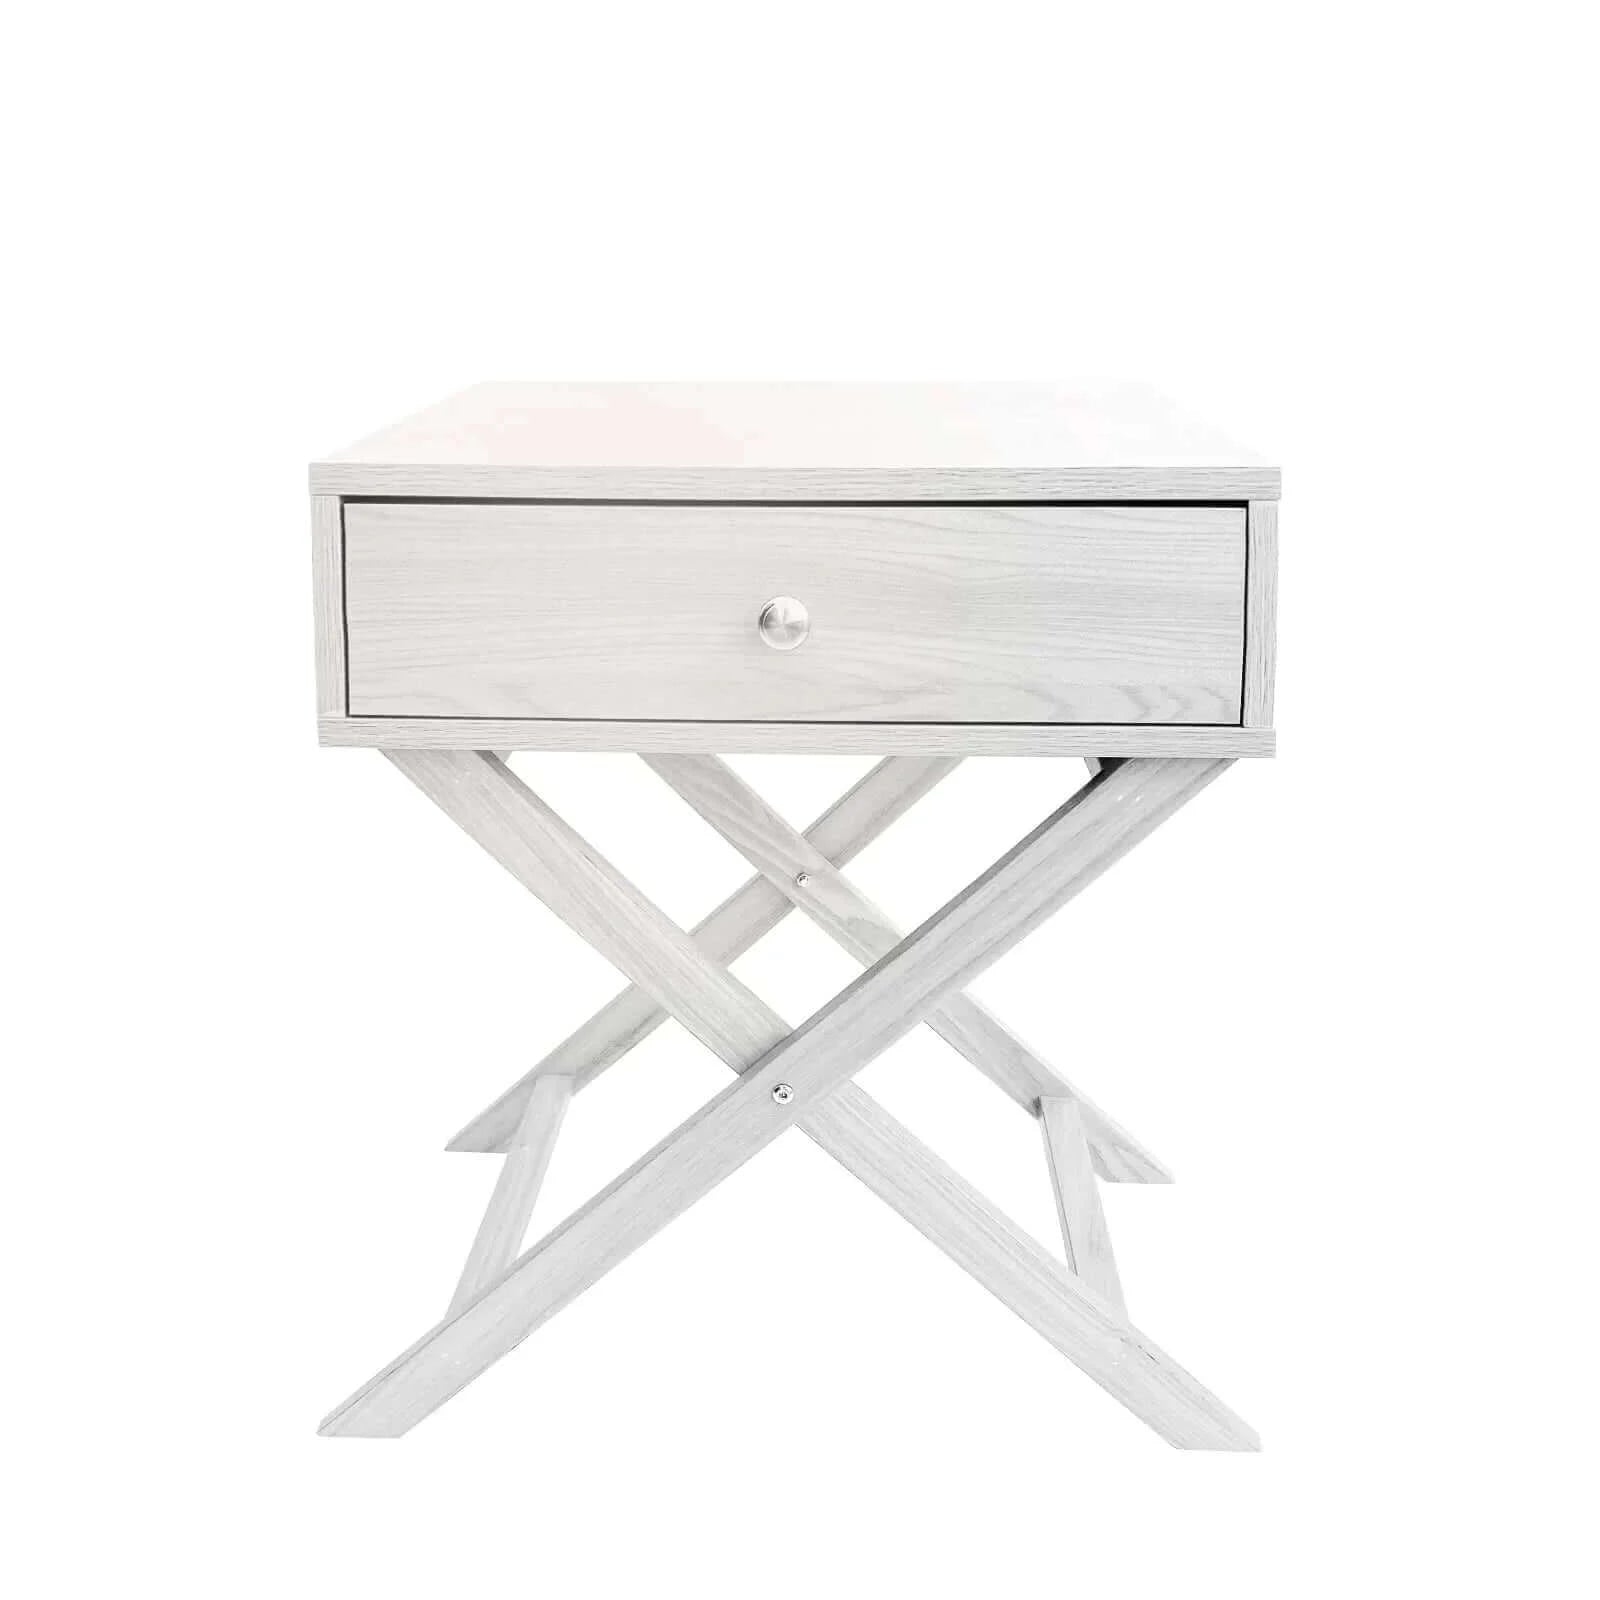 Buy milano decor bedside table surry hills white storage cabinet bedroom - one pack - white - upinteriors-Upinteriors